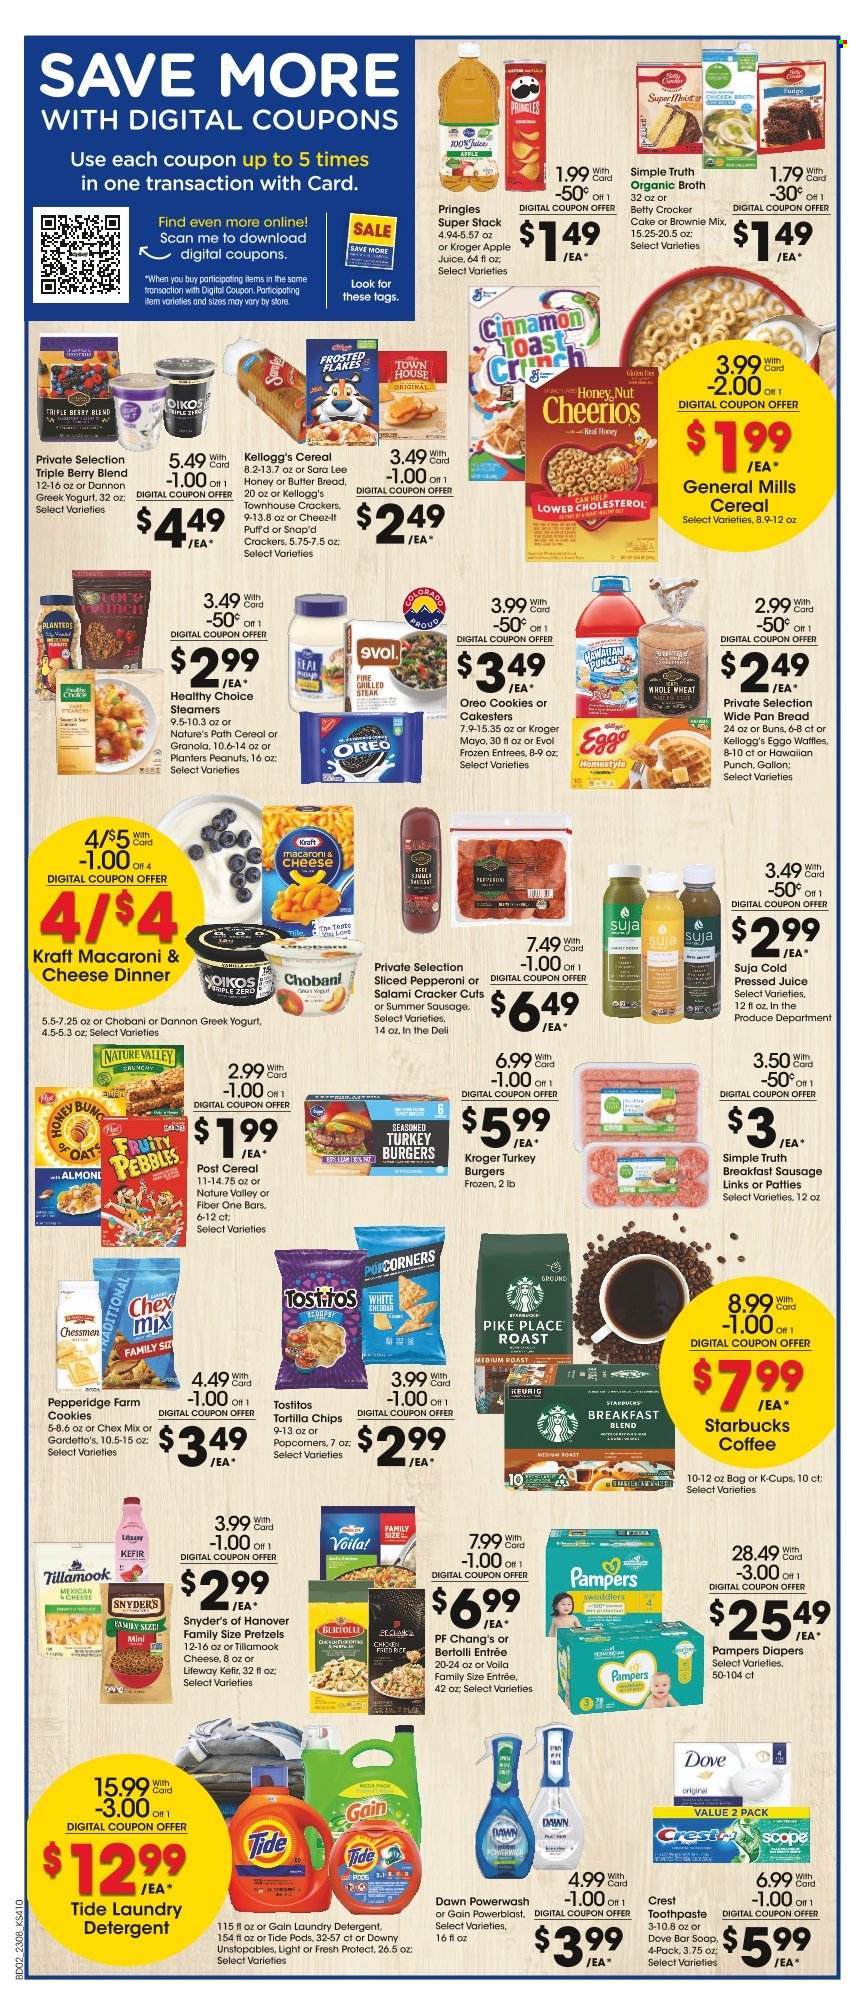 thumbnail - City Market Flyer - 03/22/2023 - 03/28/2023 - Sales products - pretzels, cake, buns, Sara Lee, waffles, brownie mix, macaroni & cheese, hamburger, Healthy Choice, Kraft®, Bertolli, roast, salami, sausage, summer sausage, pepperoni, greek yoghurt, Oreo, yoghurt, Oikos, Chobani, Dannon, kefir, cookies, Dove, crackers, Kellogg's, tortilla chips, Pringles, popcorn, Cheez-It, Tostitos, Chex Mix, broth, cereals, granola, Cheerios, Frosted Flakes, Fruity Pebbles, Nature Valley, Fiber One, cinnamon, peanuts, Planters, apple juice, juice, coffee, Starbucks, coffee capsules, K-Cups, Keurig, breakfast blend, turkey burger, Pampers, nappies, detergent, Gain, Tide, Unstopables, laundry detergent, soap bar, soap, toothpaste, Crest, pan, Hill's. Page 3.